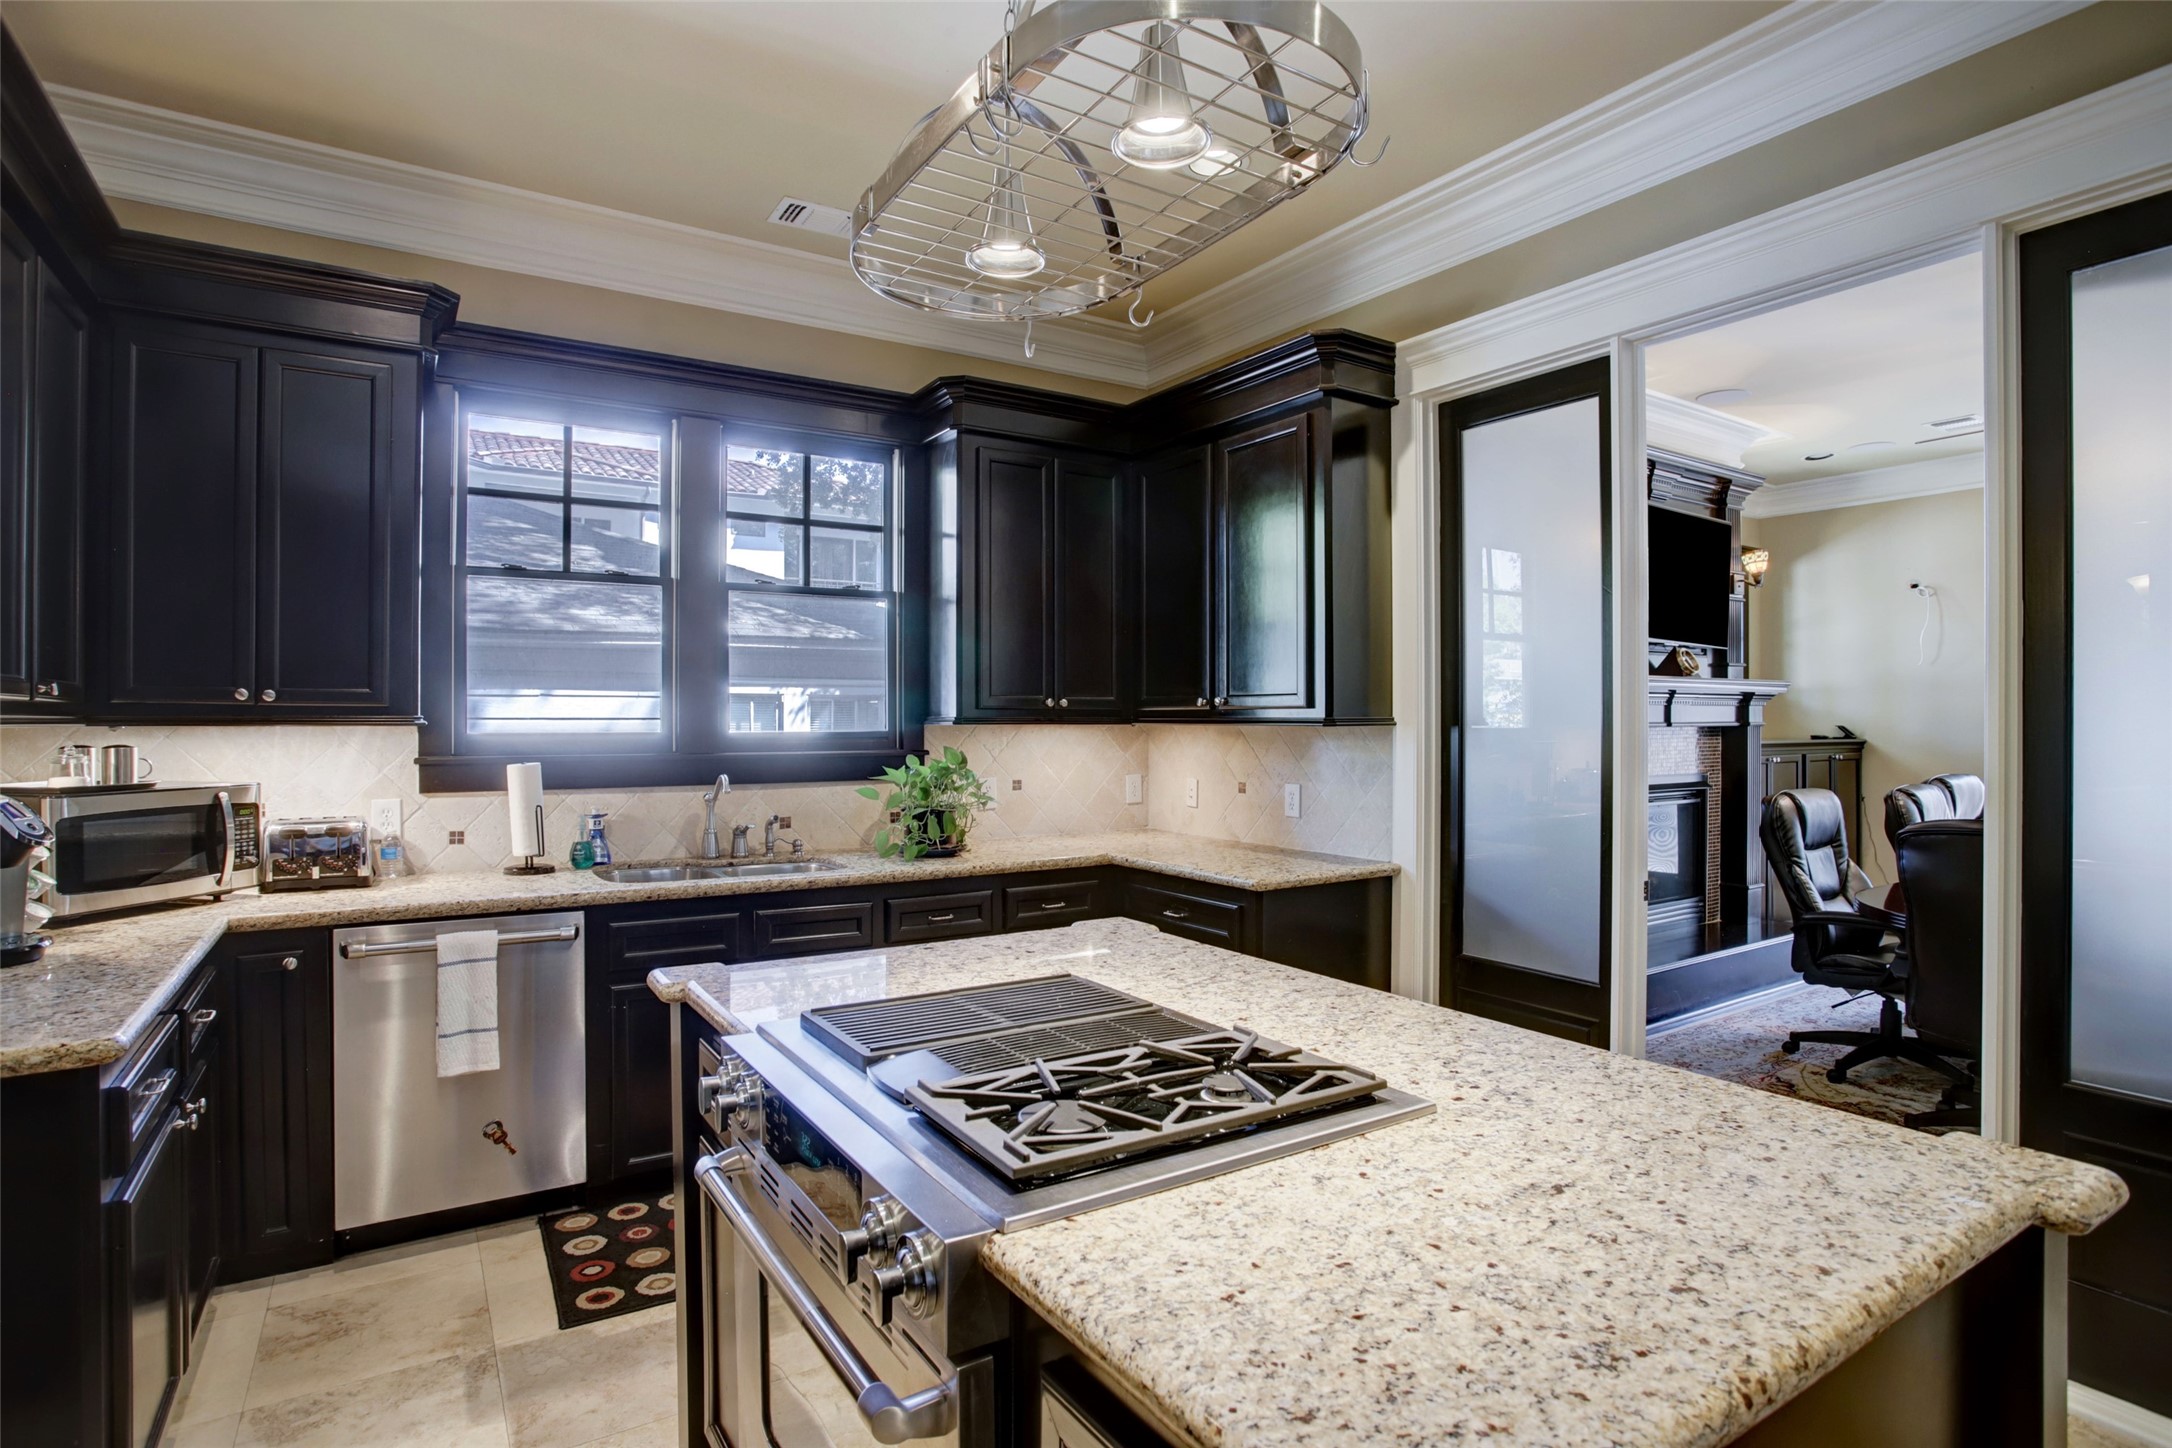 The kitchen features island with granite countertops, gas range, convection oven, & oversized cabinets.